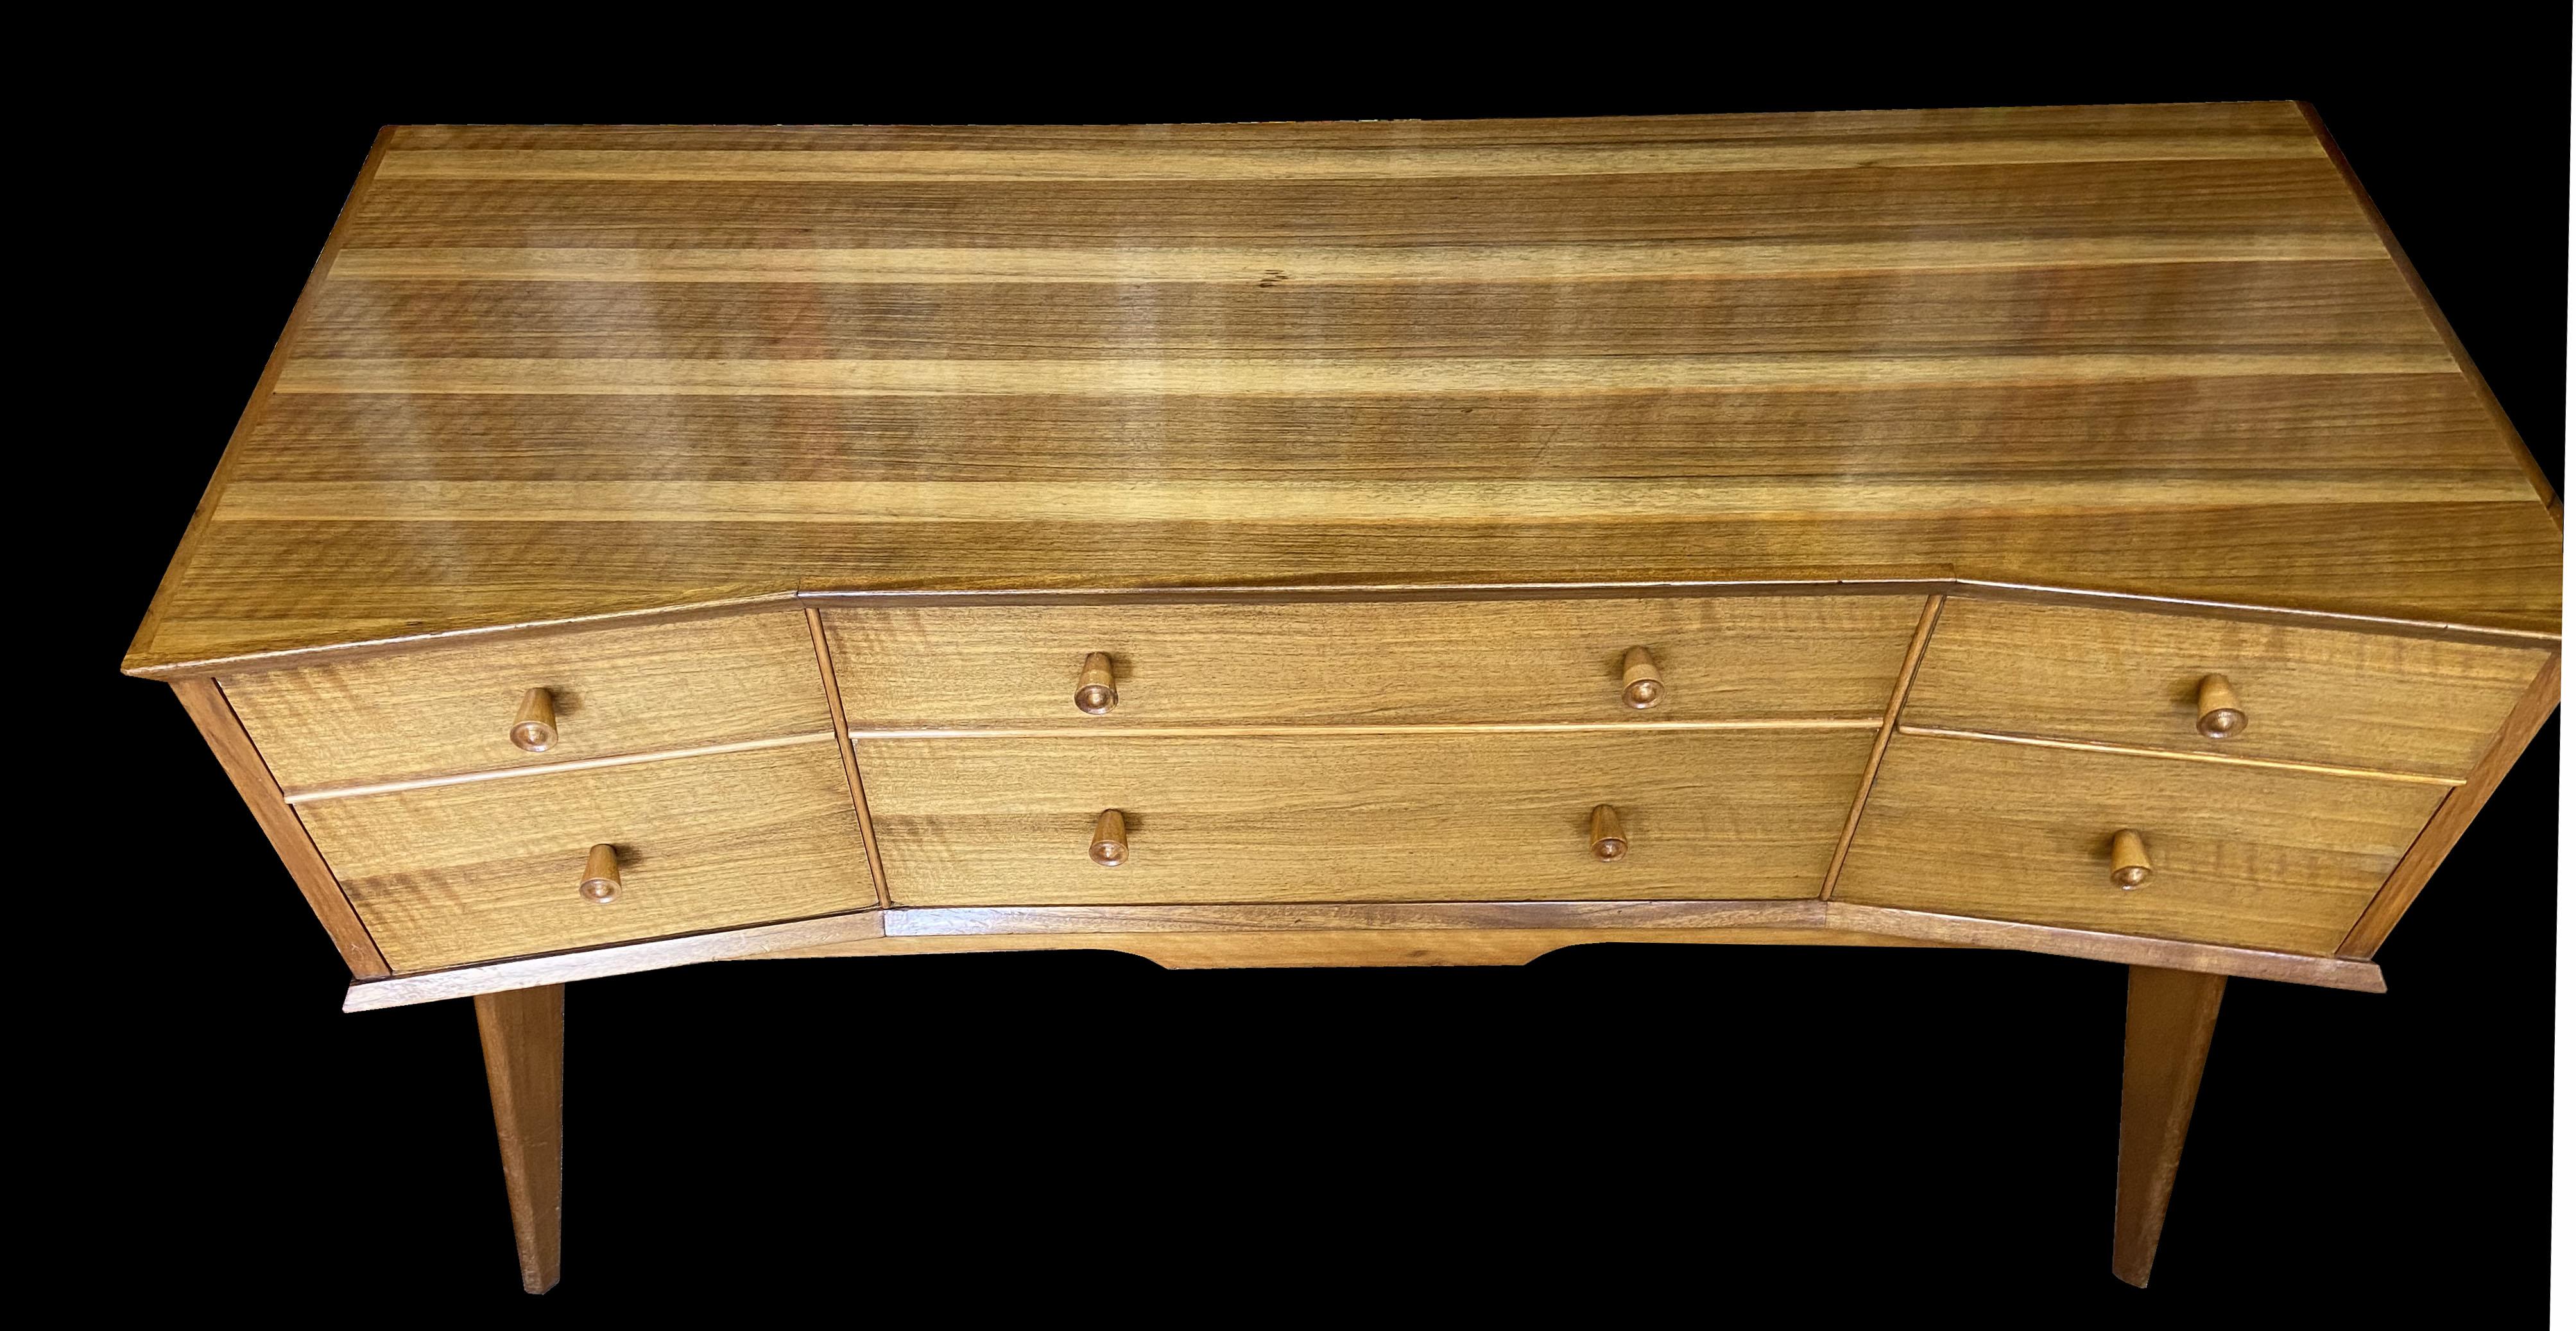 This piece, along with the Chest also listed, are by Alfred Cox who designed for Heal's of London, and made by 'Handcraft'. This lovely Writing or Dressing table is made using maple and Walnut.